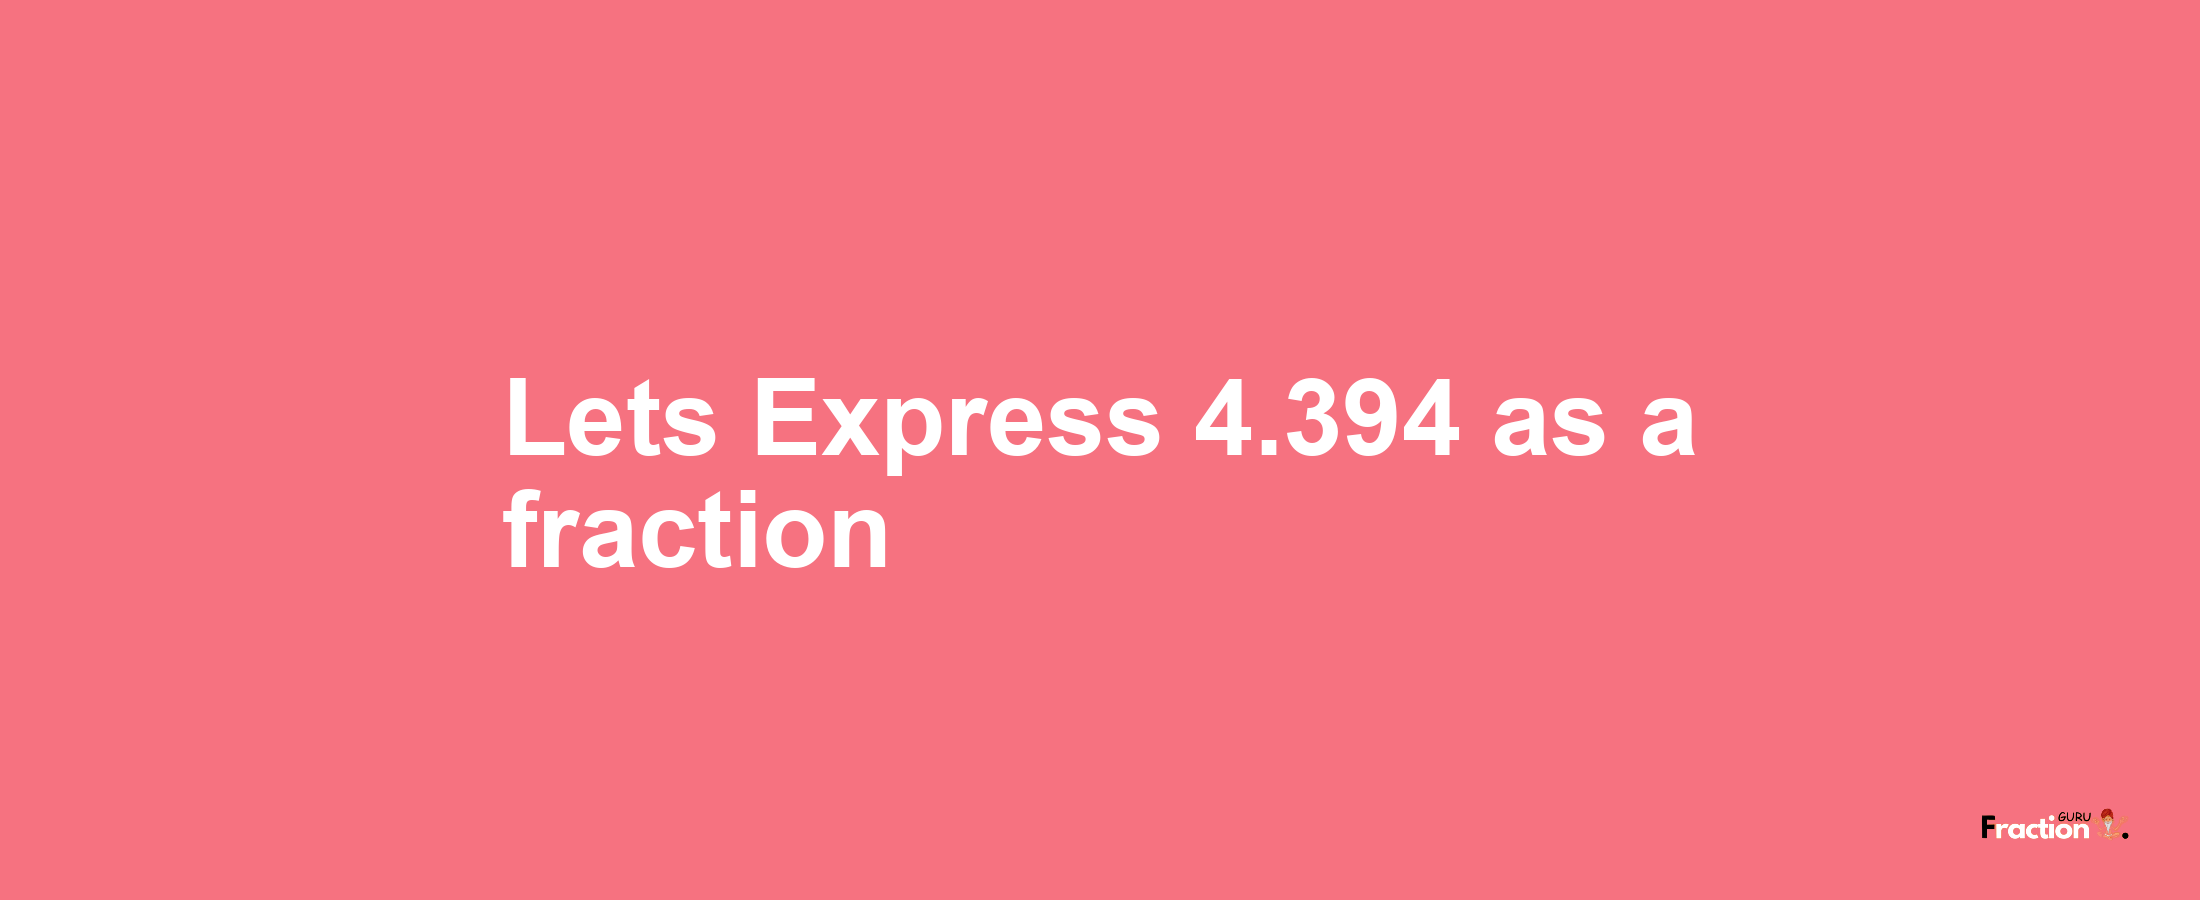 Lets Express 4.394 as afraction